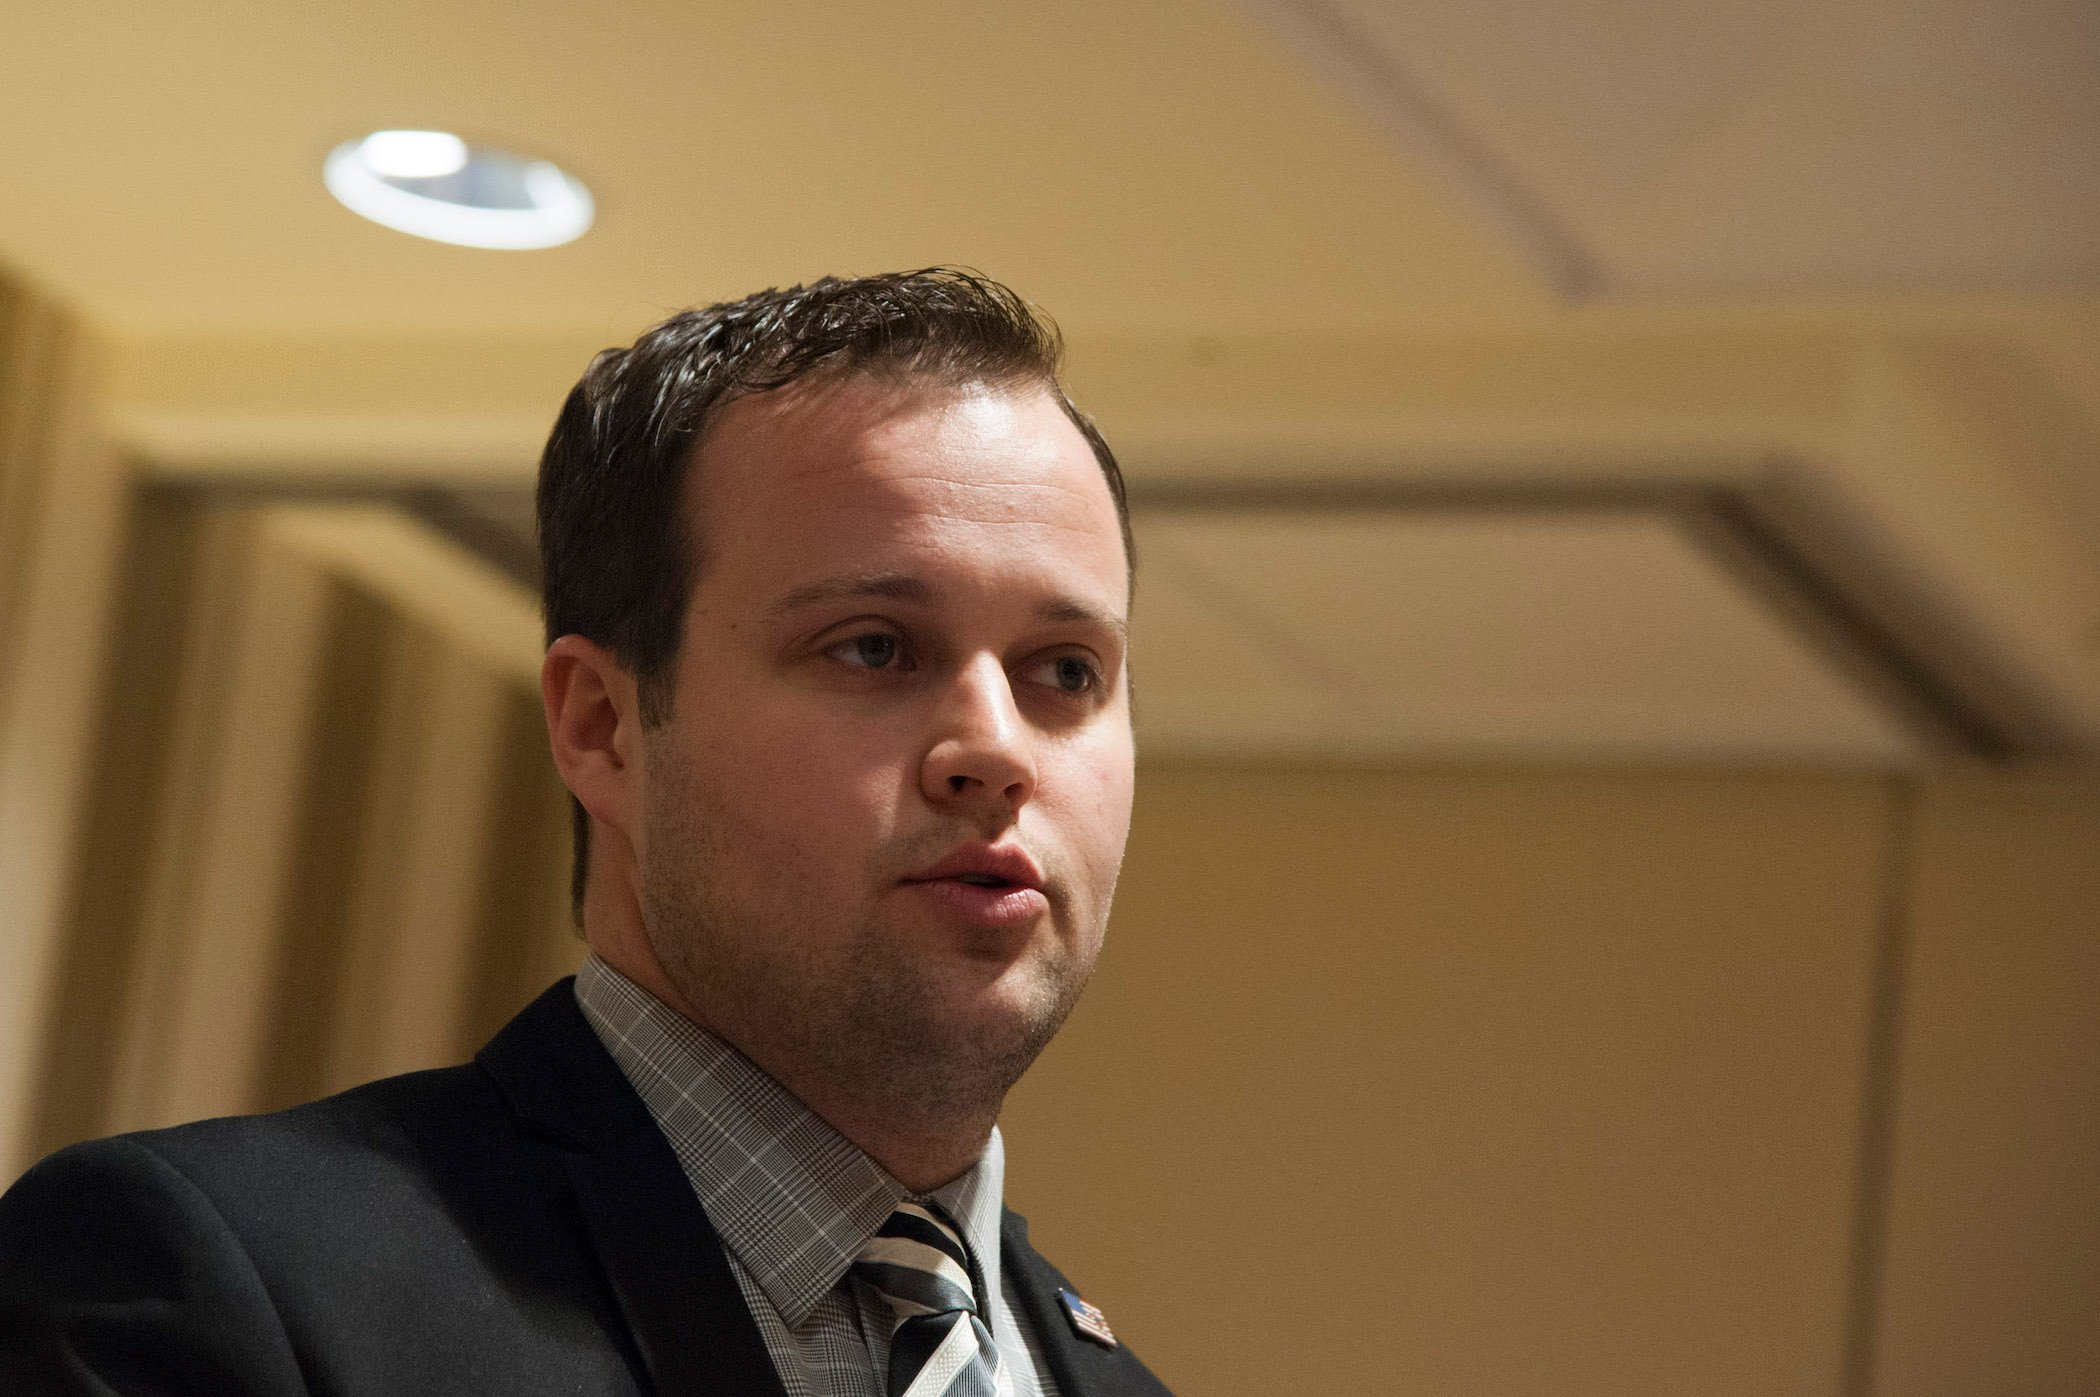 A close-up of Josh Duggar's face at a conference. Josh Duggar news notes Josh was arrested in April 2021 on suspicion of obtaining child sexual abuse material.